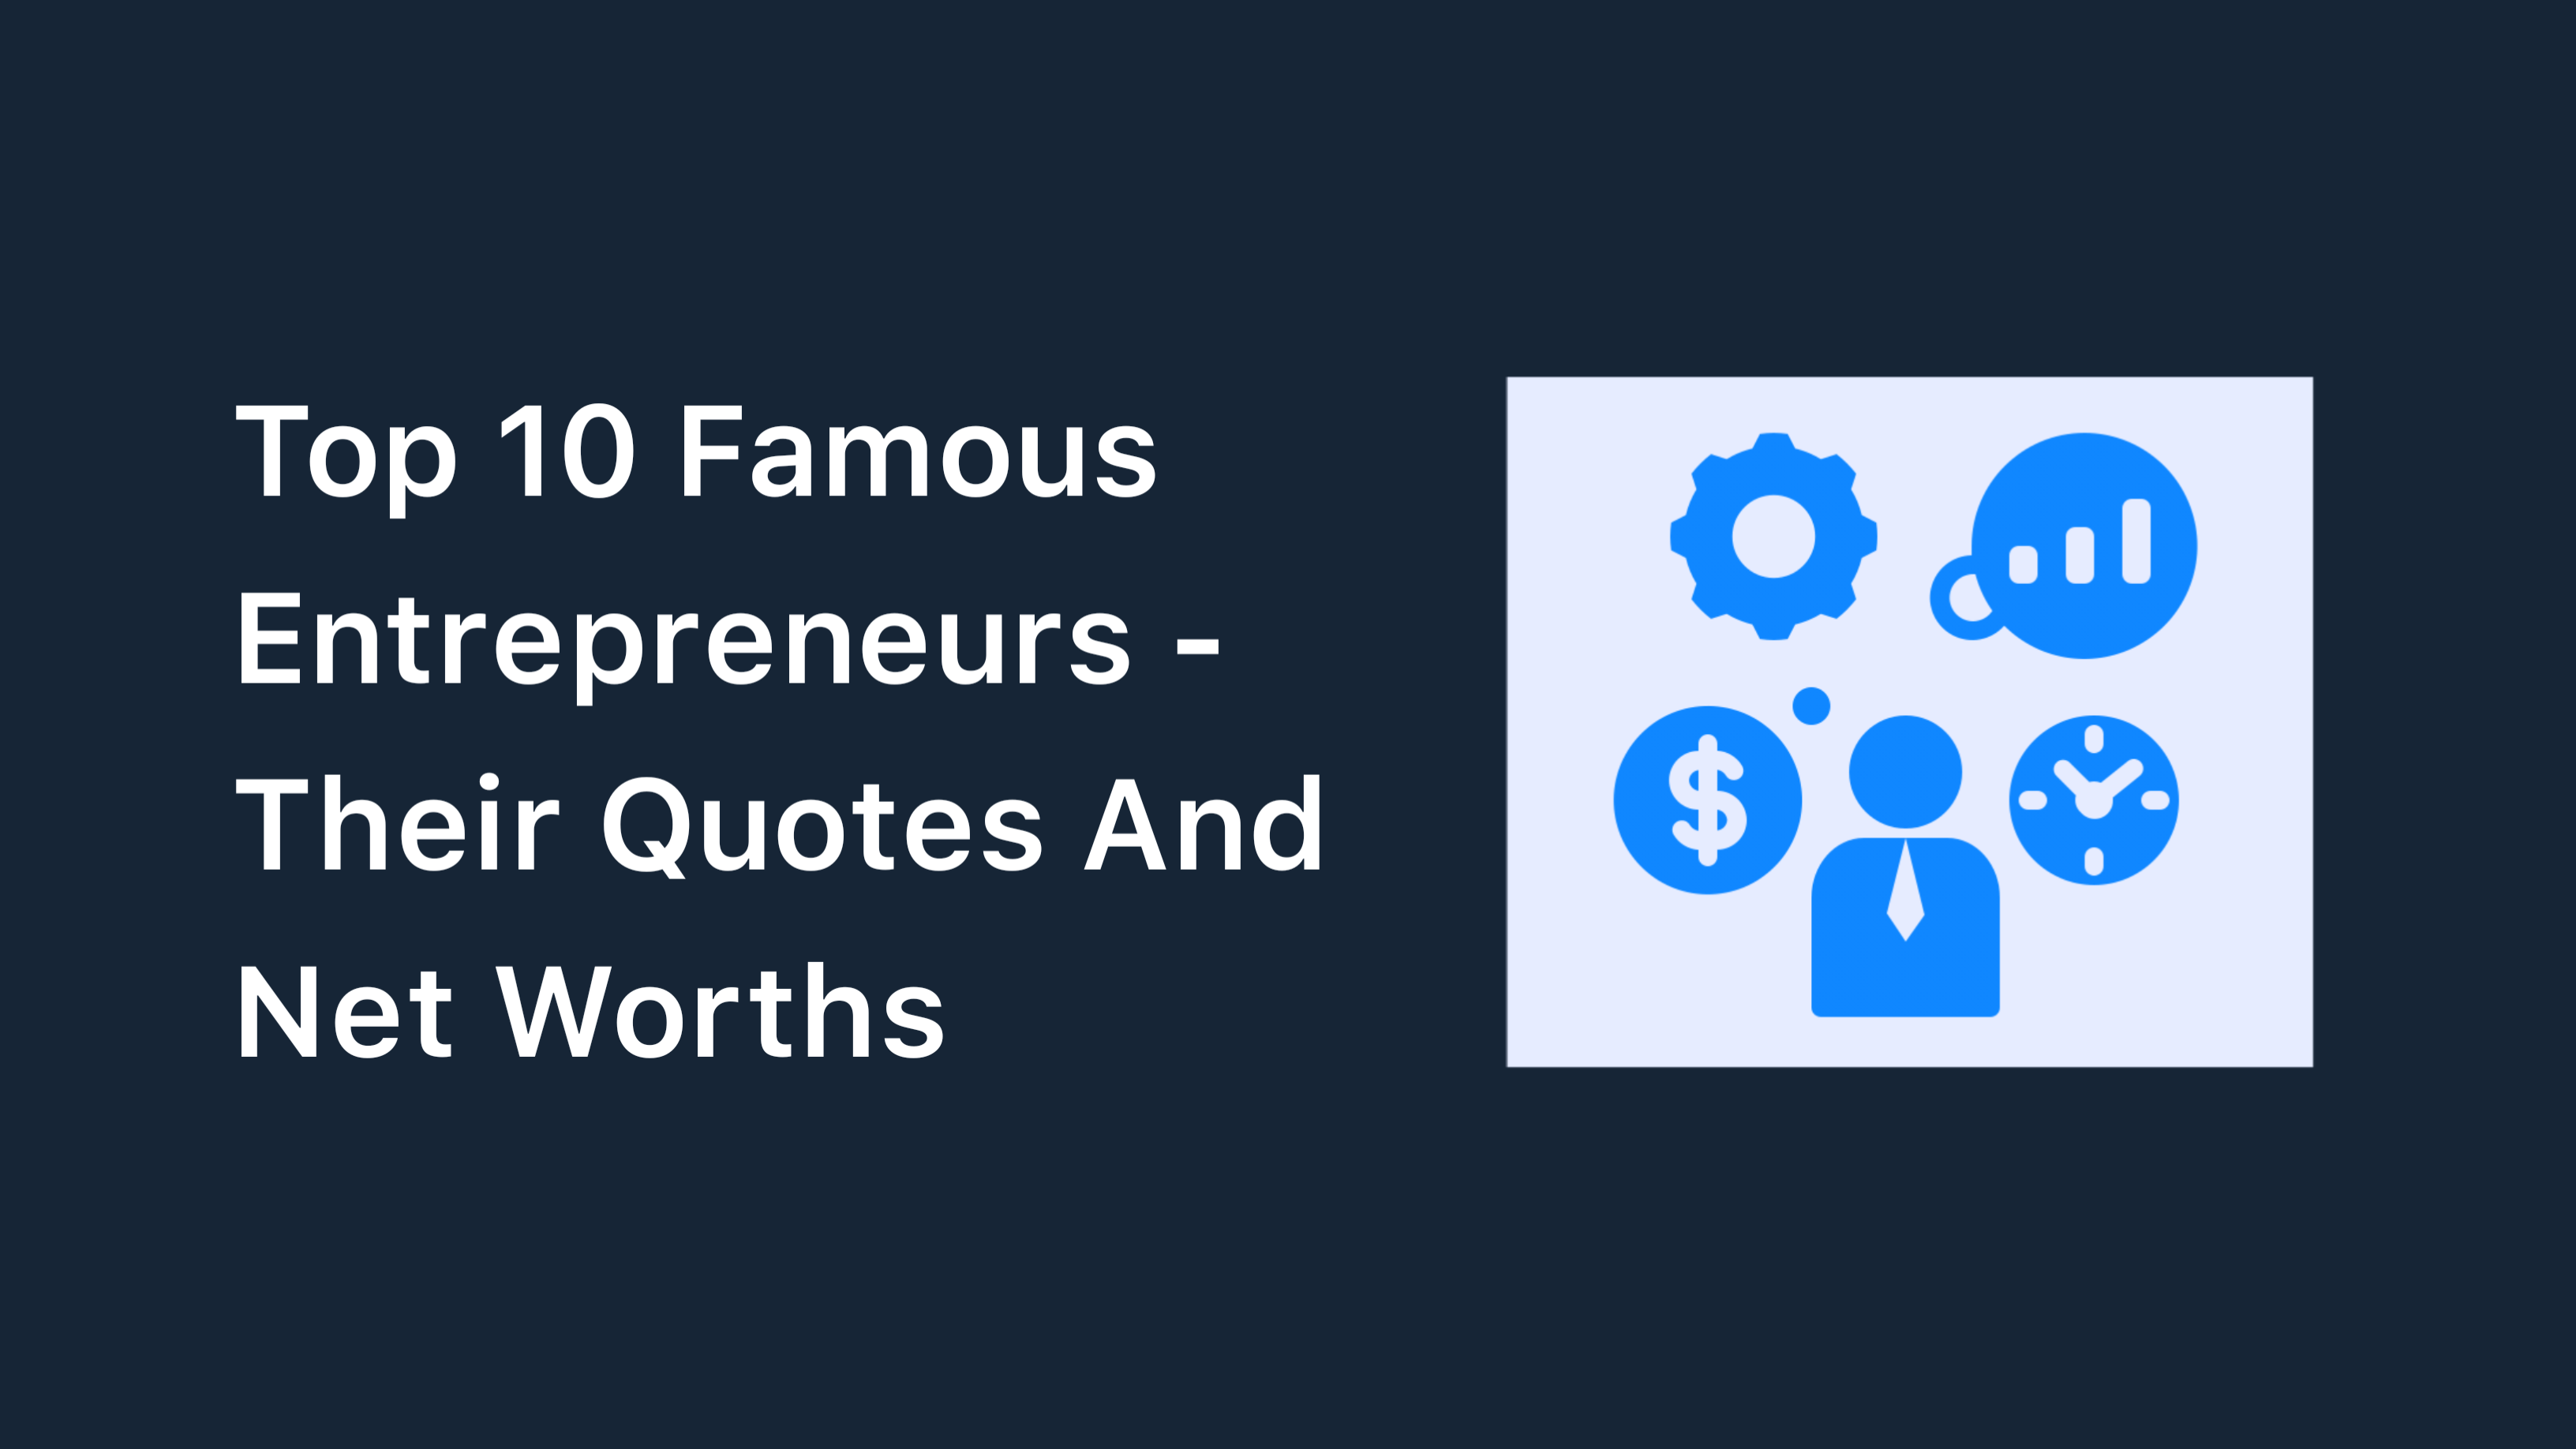 Top 10 Famous Entrepreneurs - Quotes And Net Worths